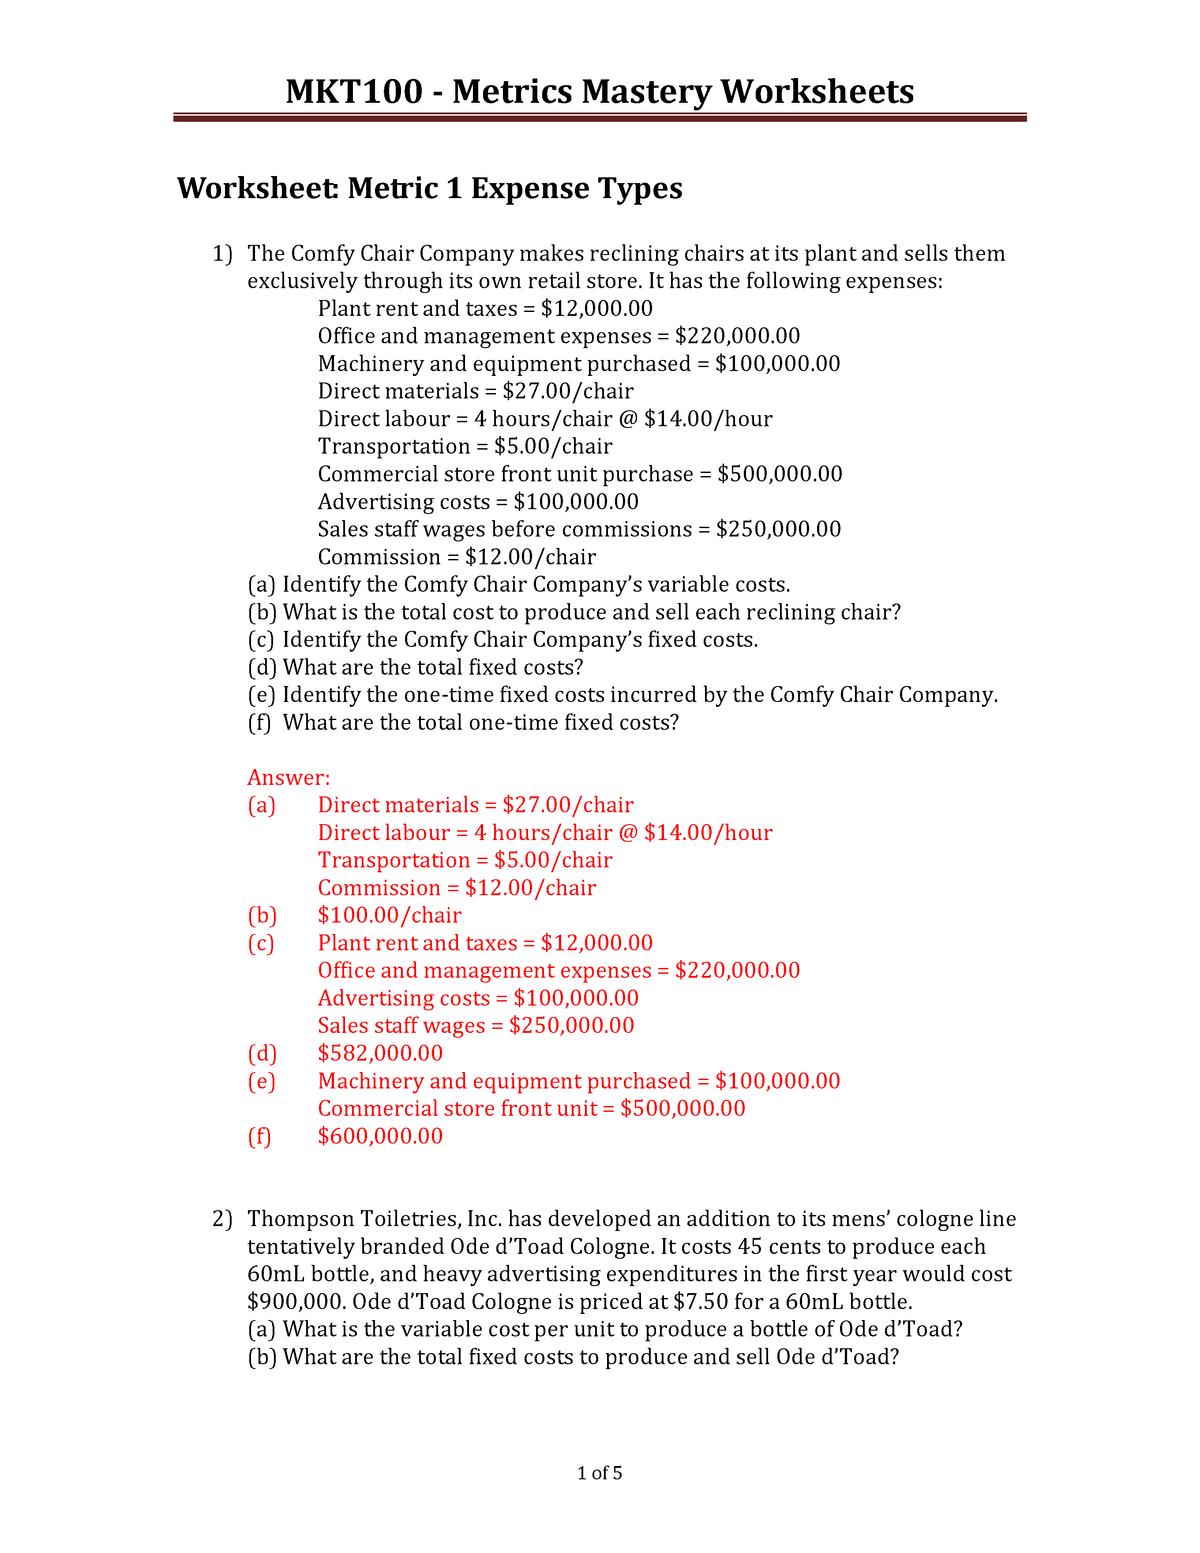 Metrics 1  2 Mastery Worksheets  With Answers  Cmkt 100